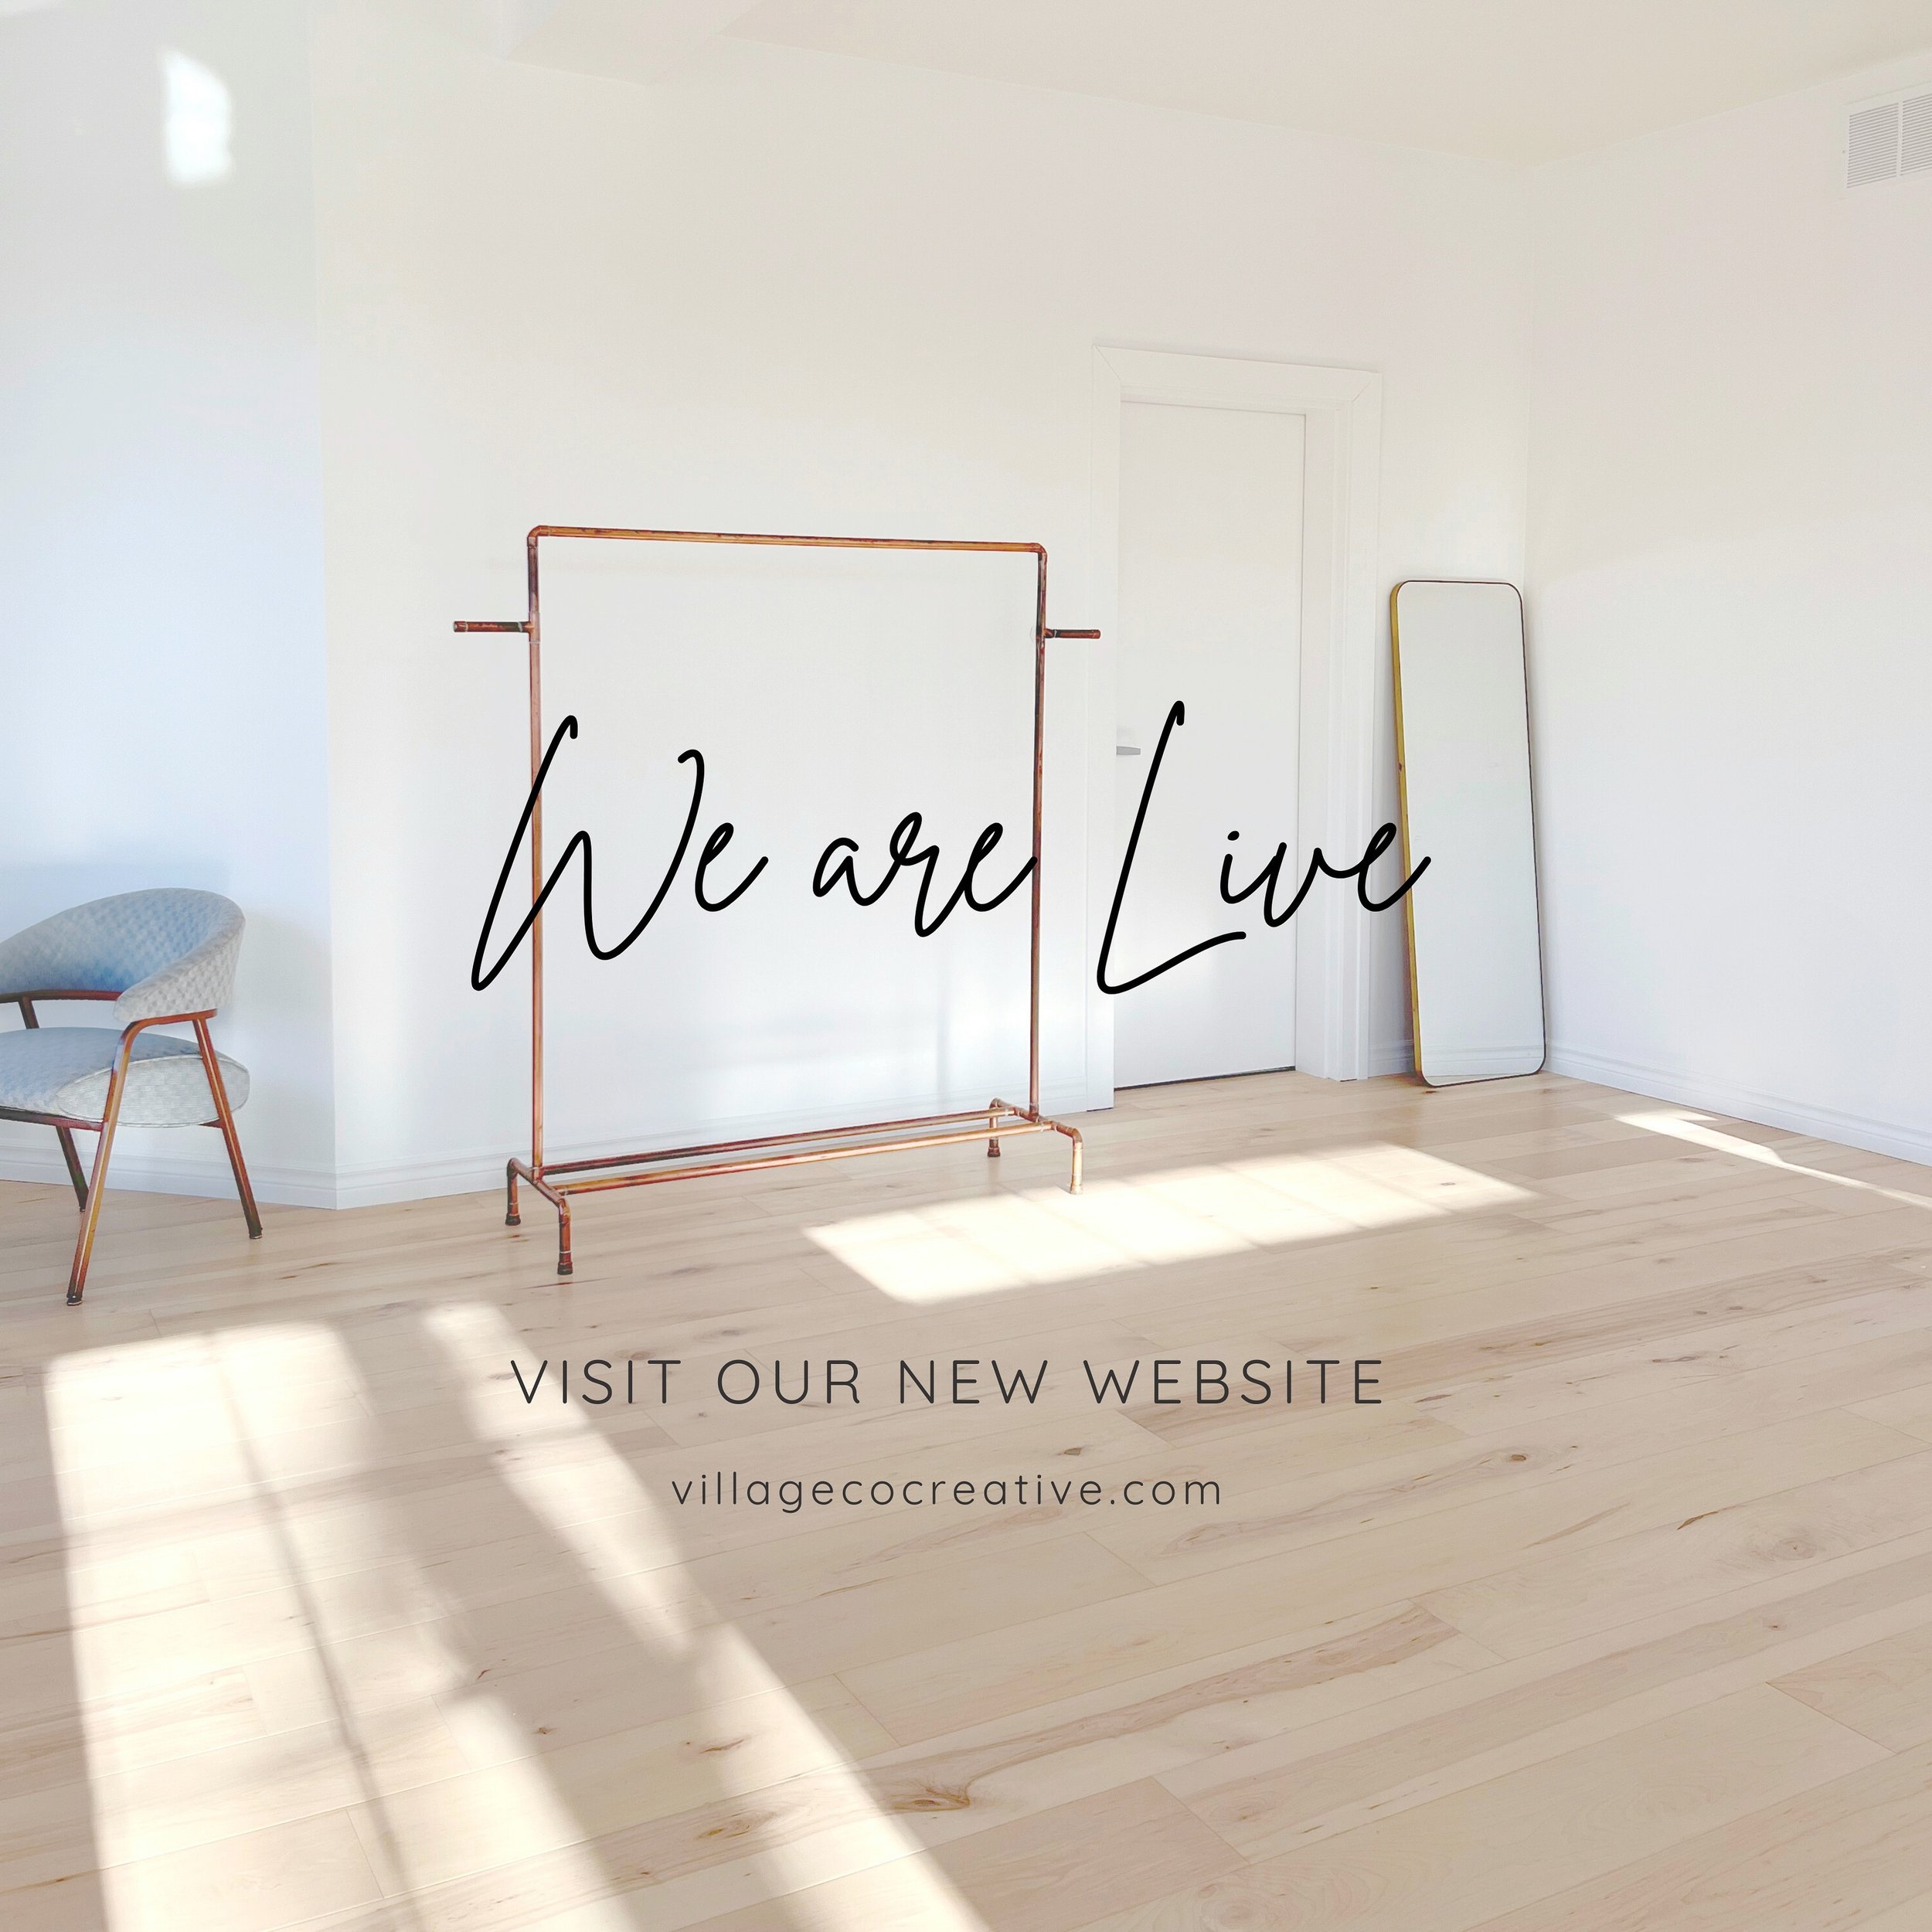 Our website is officially live!! 🎉 Book your dates as early as next week 😊 Click the link in our profile to get started.

We are so excited to invite you into this space and see the magic you create ✨

Don&rsquo;t miss out on our limited time offer